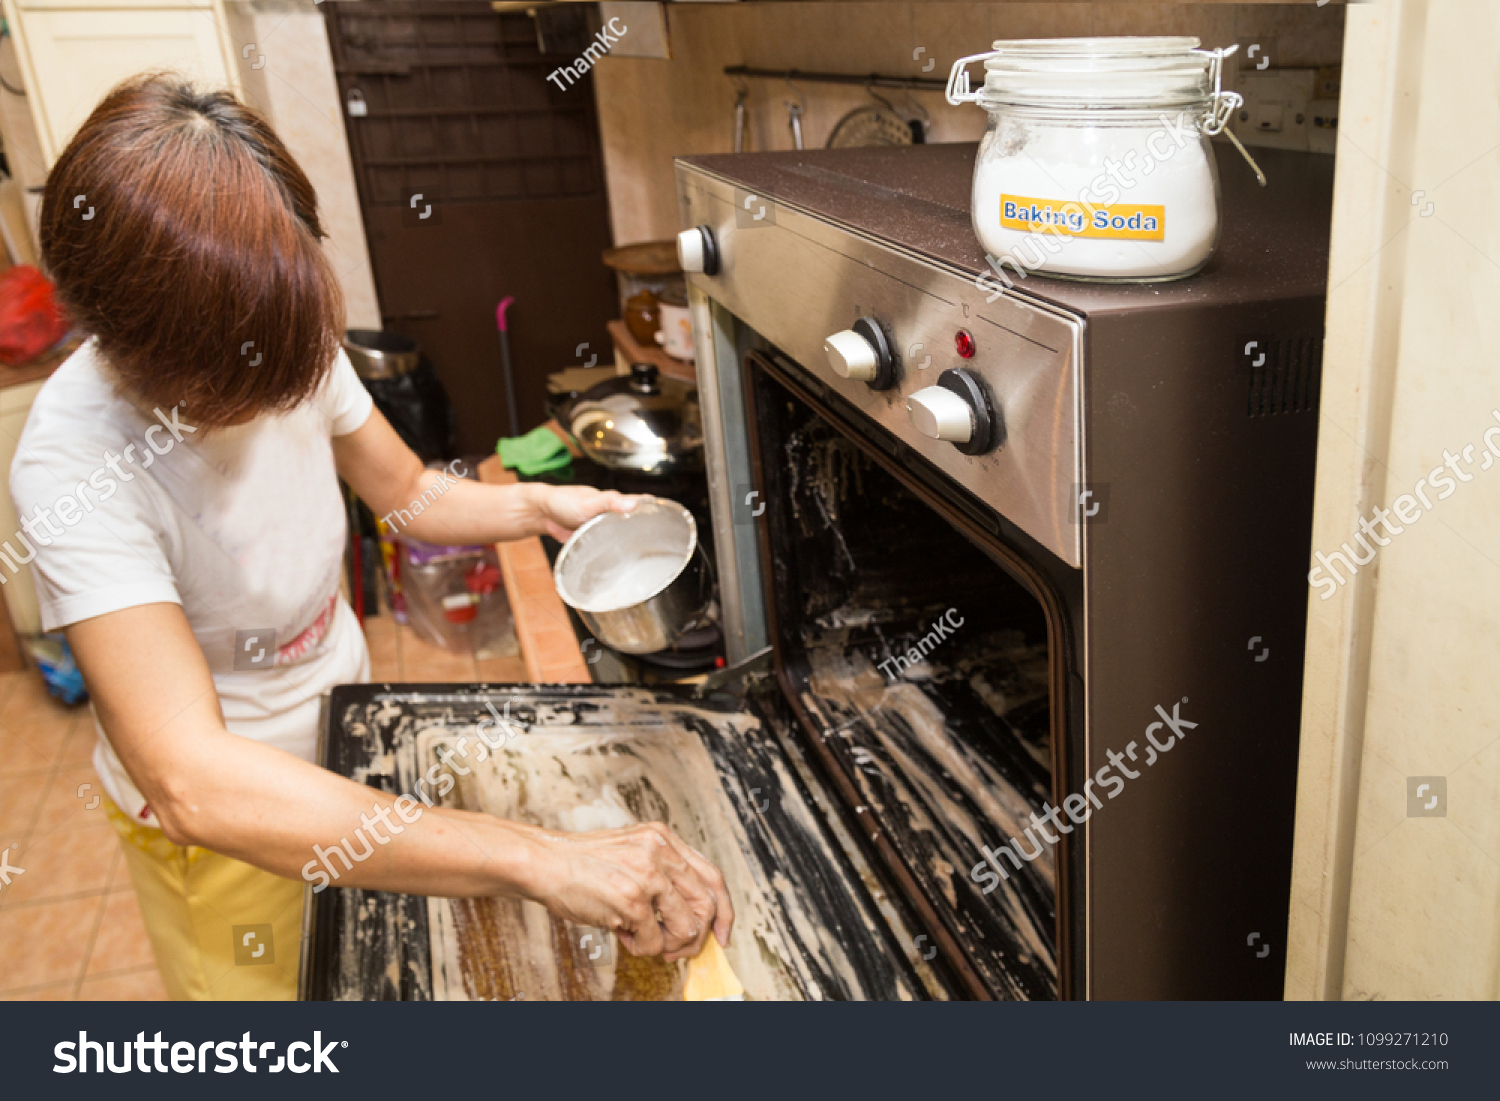 Person Applying Mixed Baking Soda Onto Stock Image Download Now